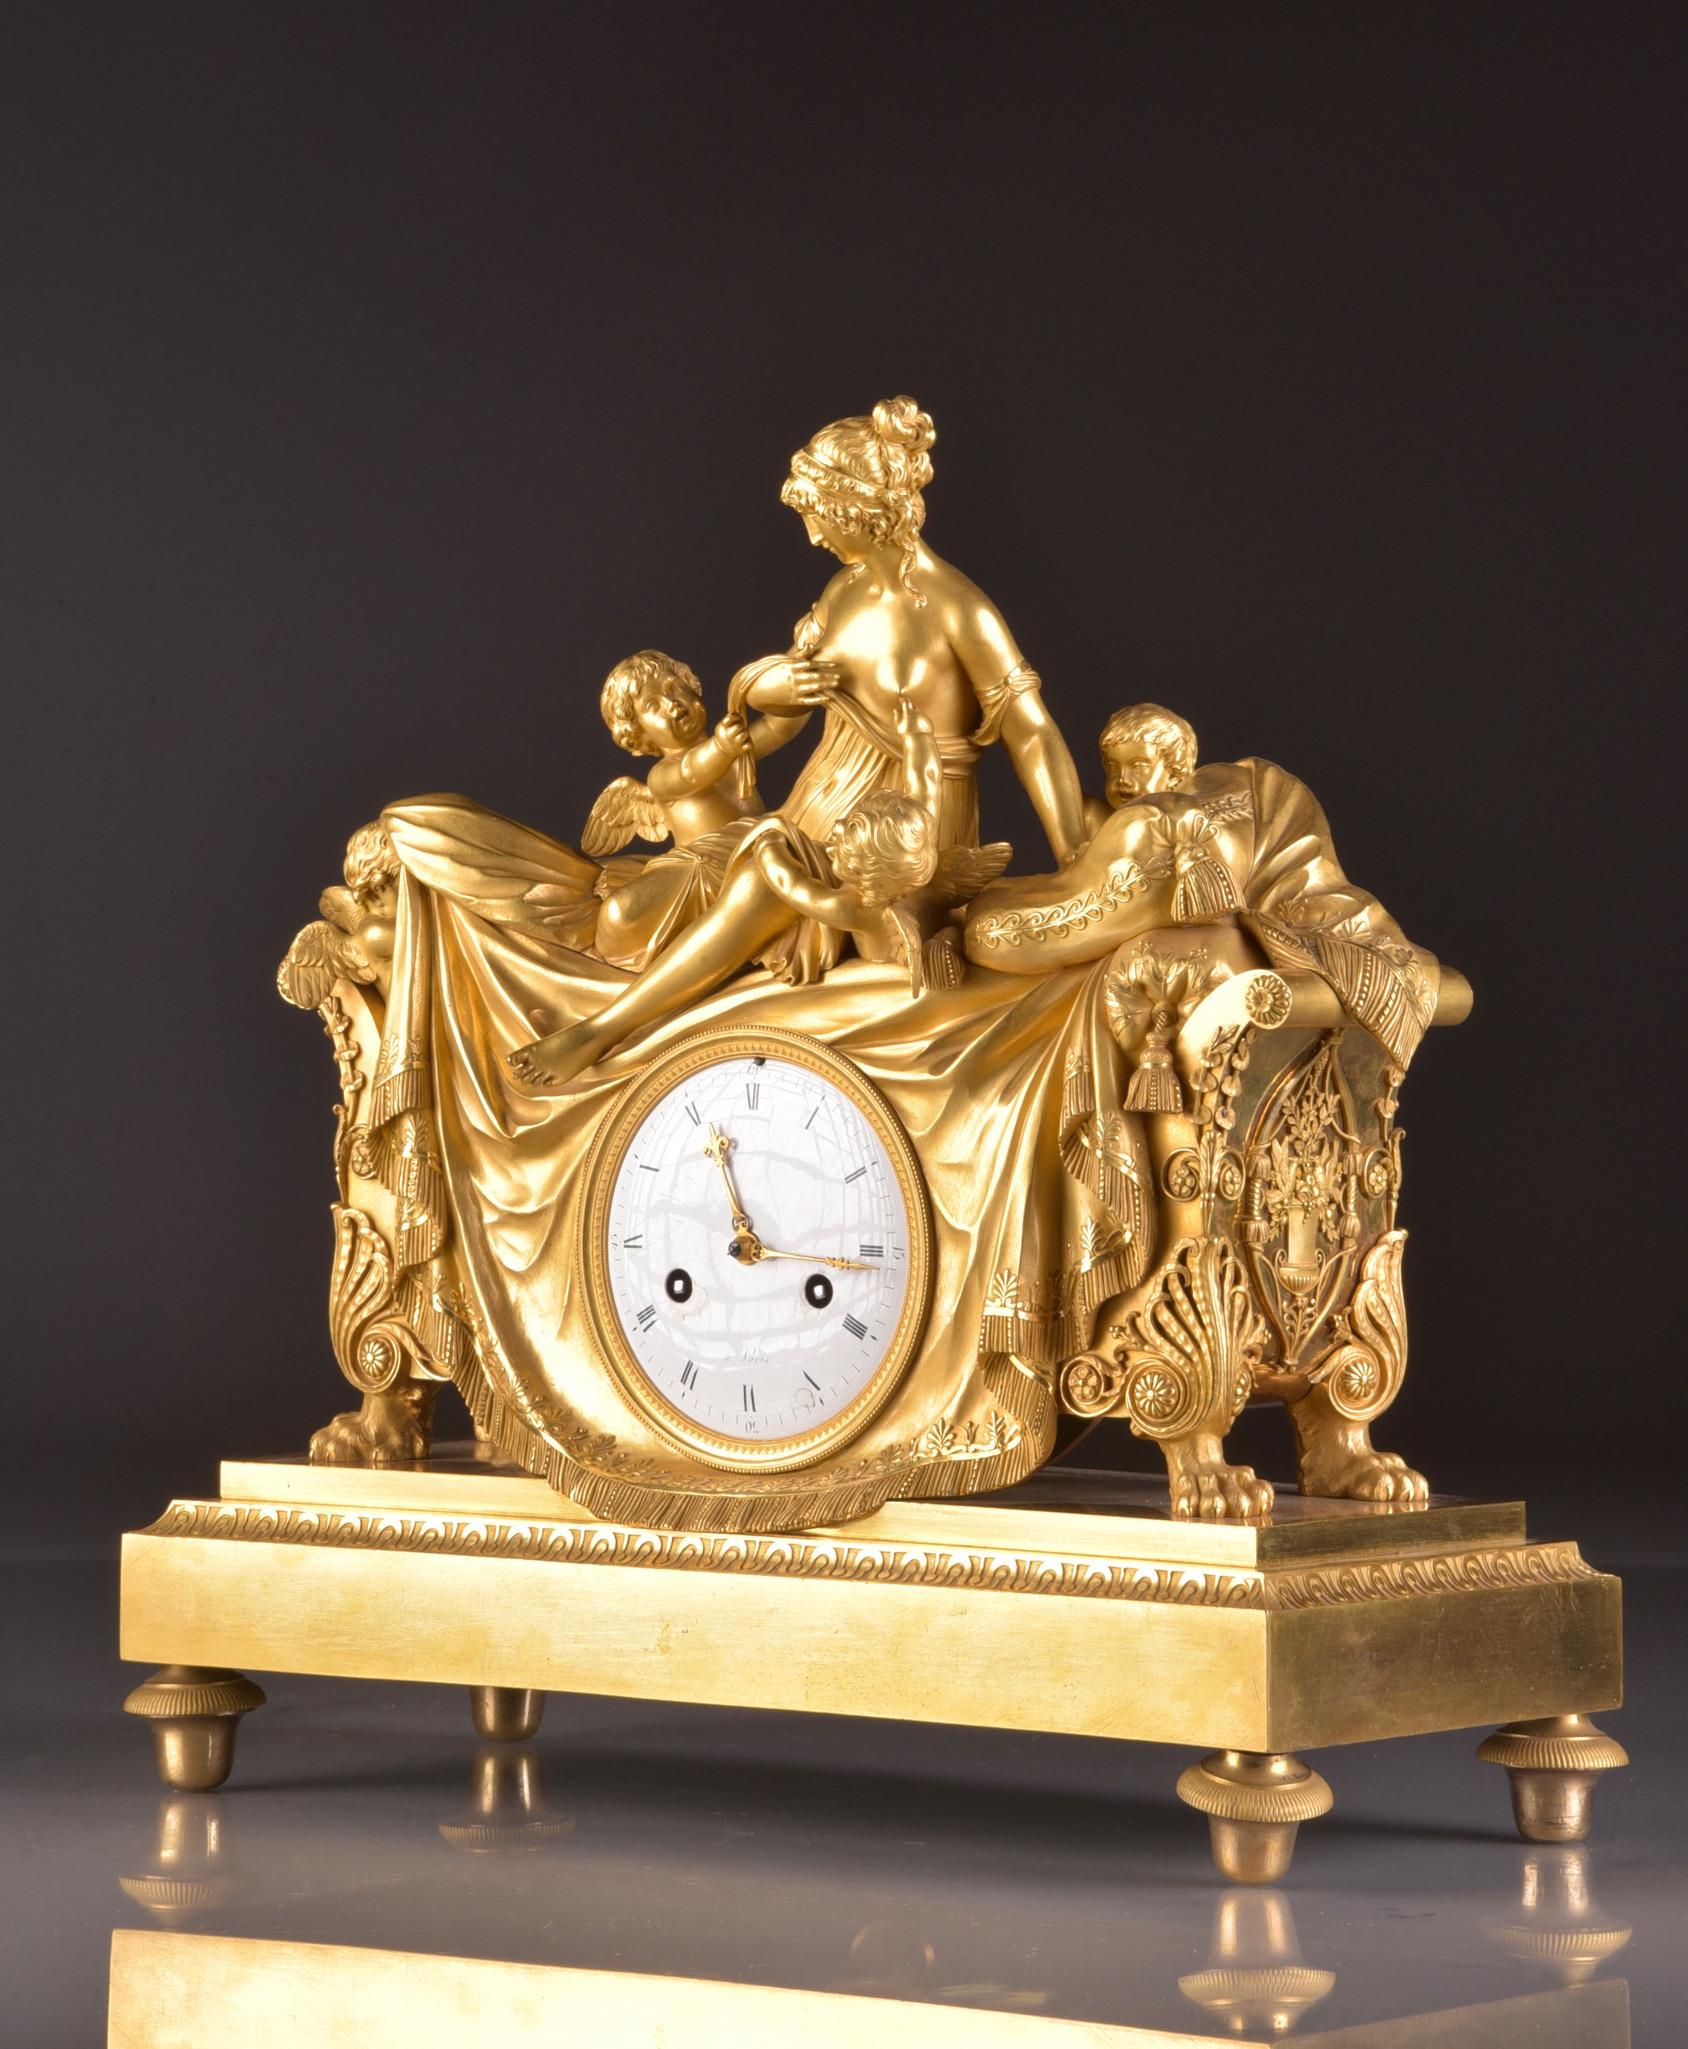 Bronze Exceptional Beautiful Rare Large French Attributed to Claude Galle, '1759-1816' For Sale